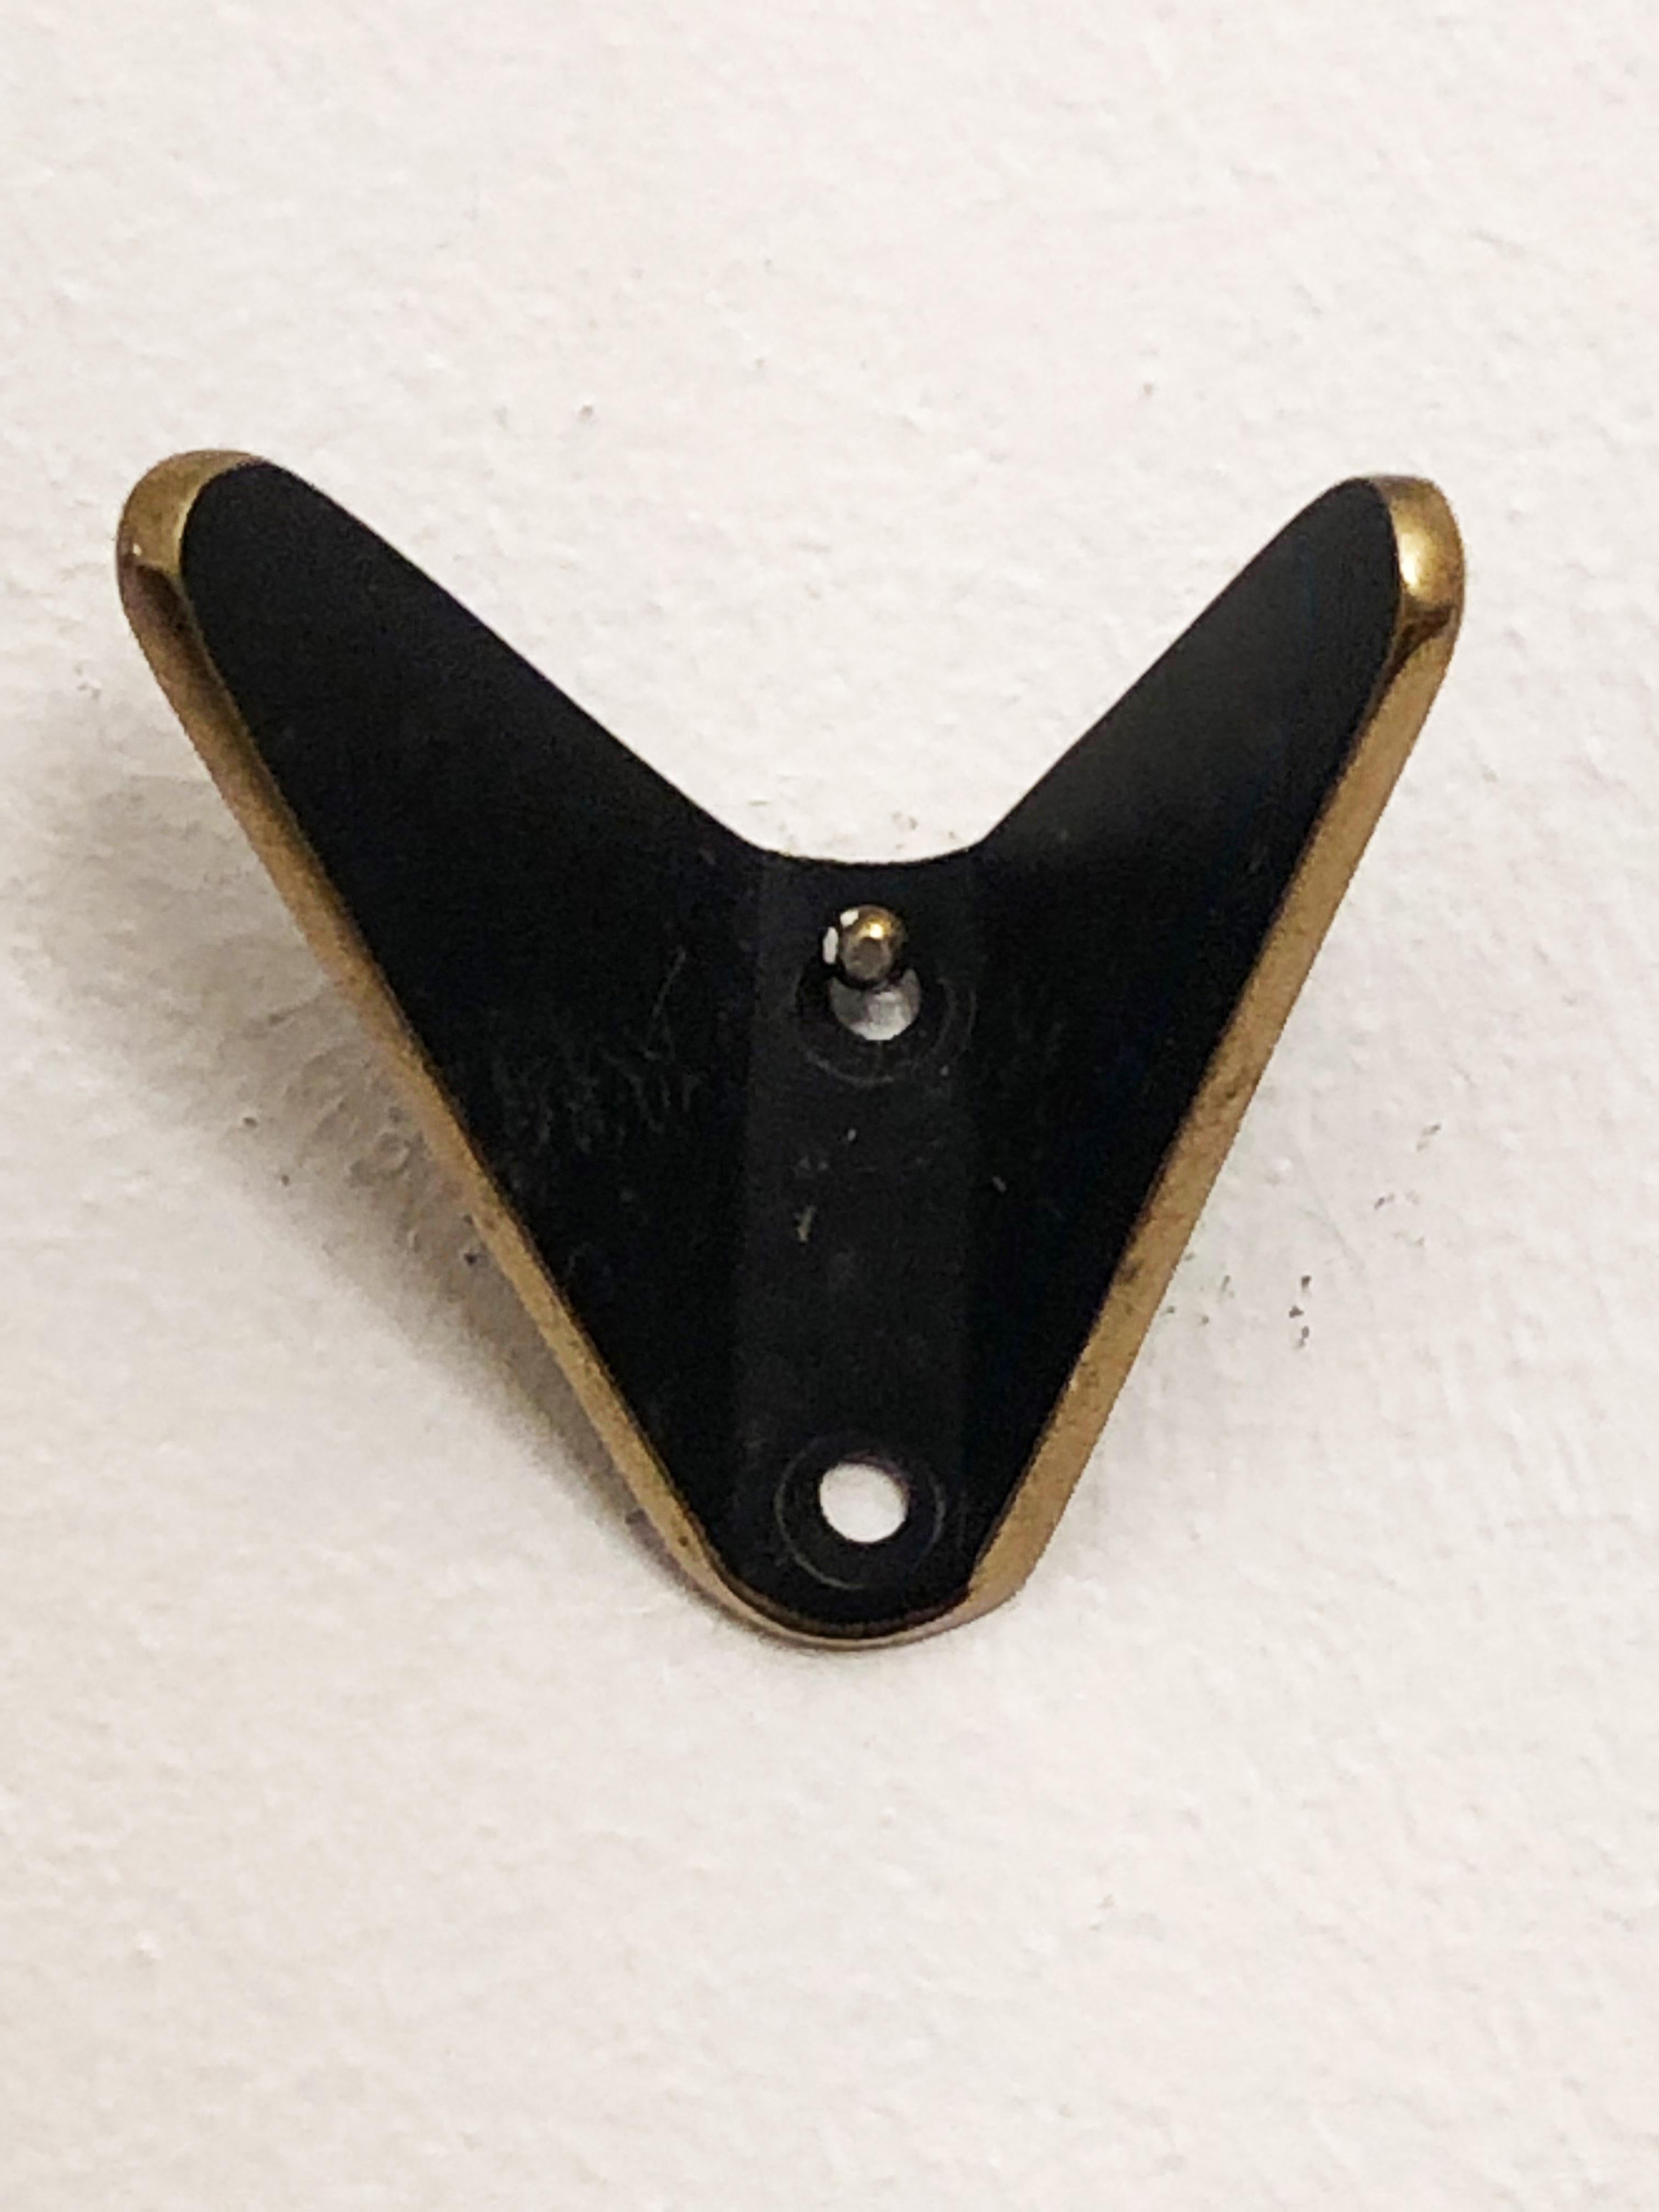 Beautiful Austrian brass hooks manufactured by Hertha Baller in Austria in the 1950s.
Up to 12 available.